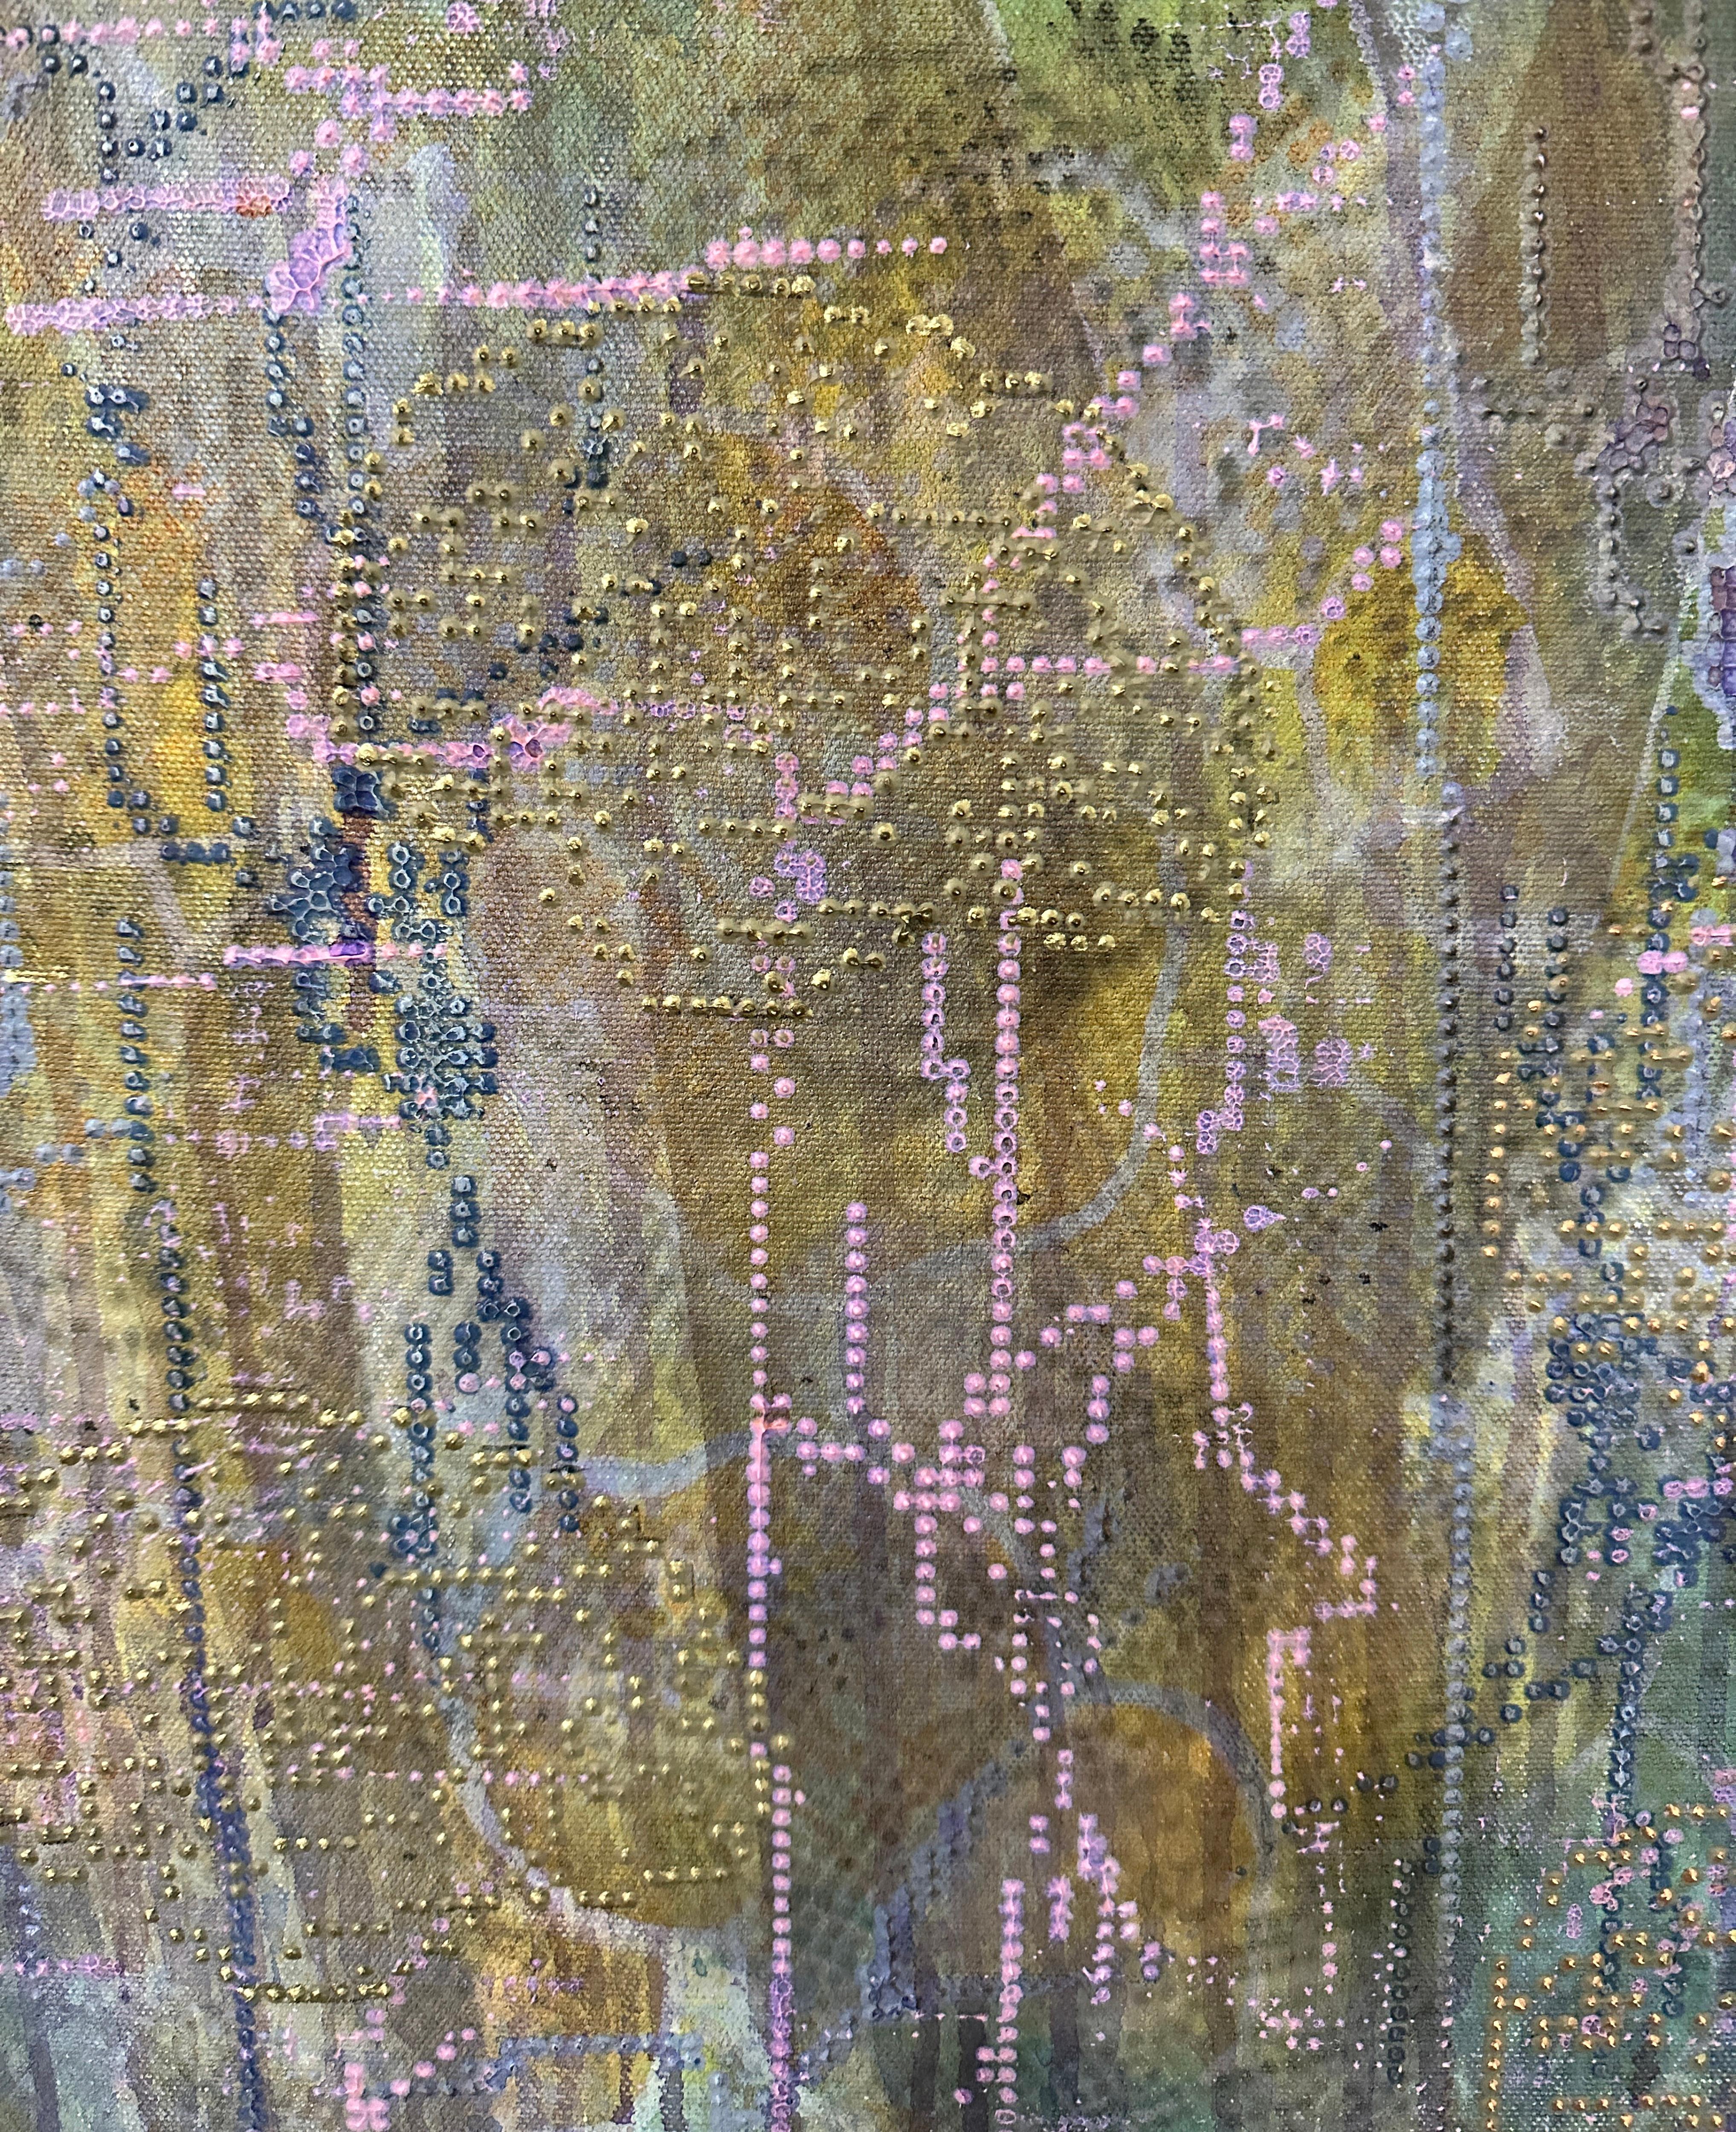 NEEDLEPOINT NEUROLOGY, patterned, pastel, earthtones, texture - Painting by Barbara Strasen